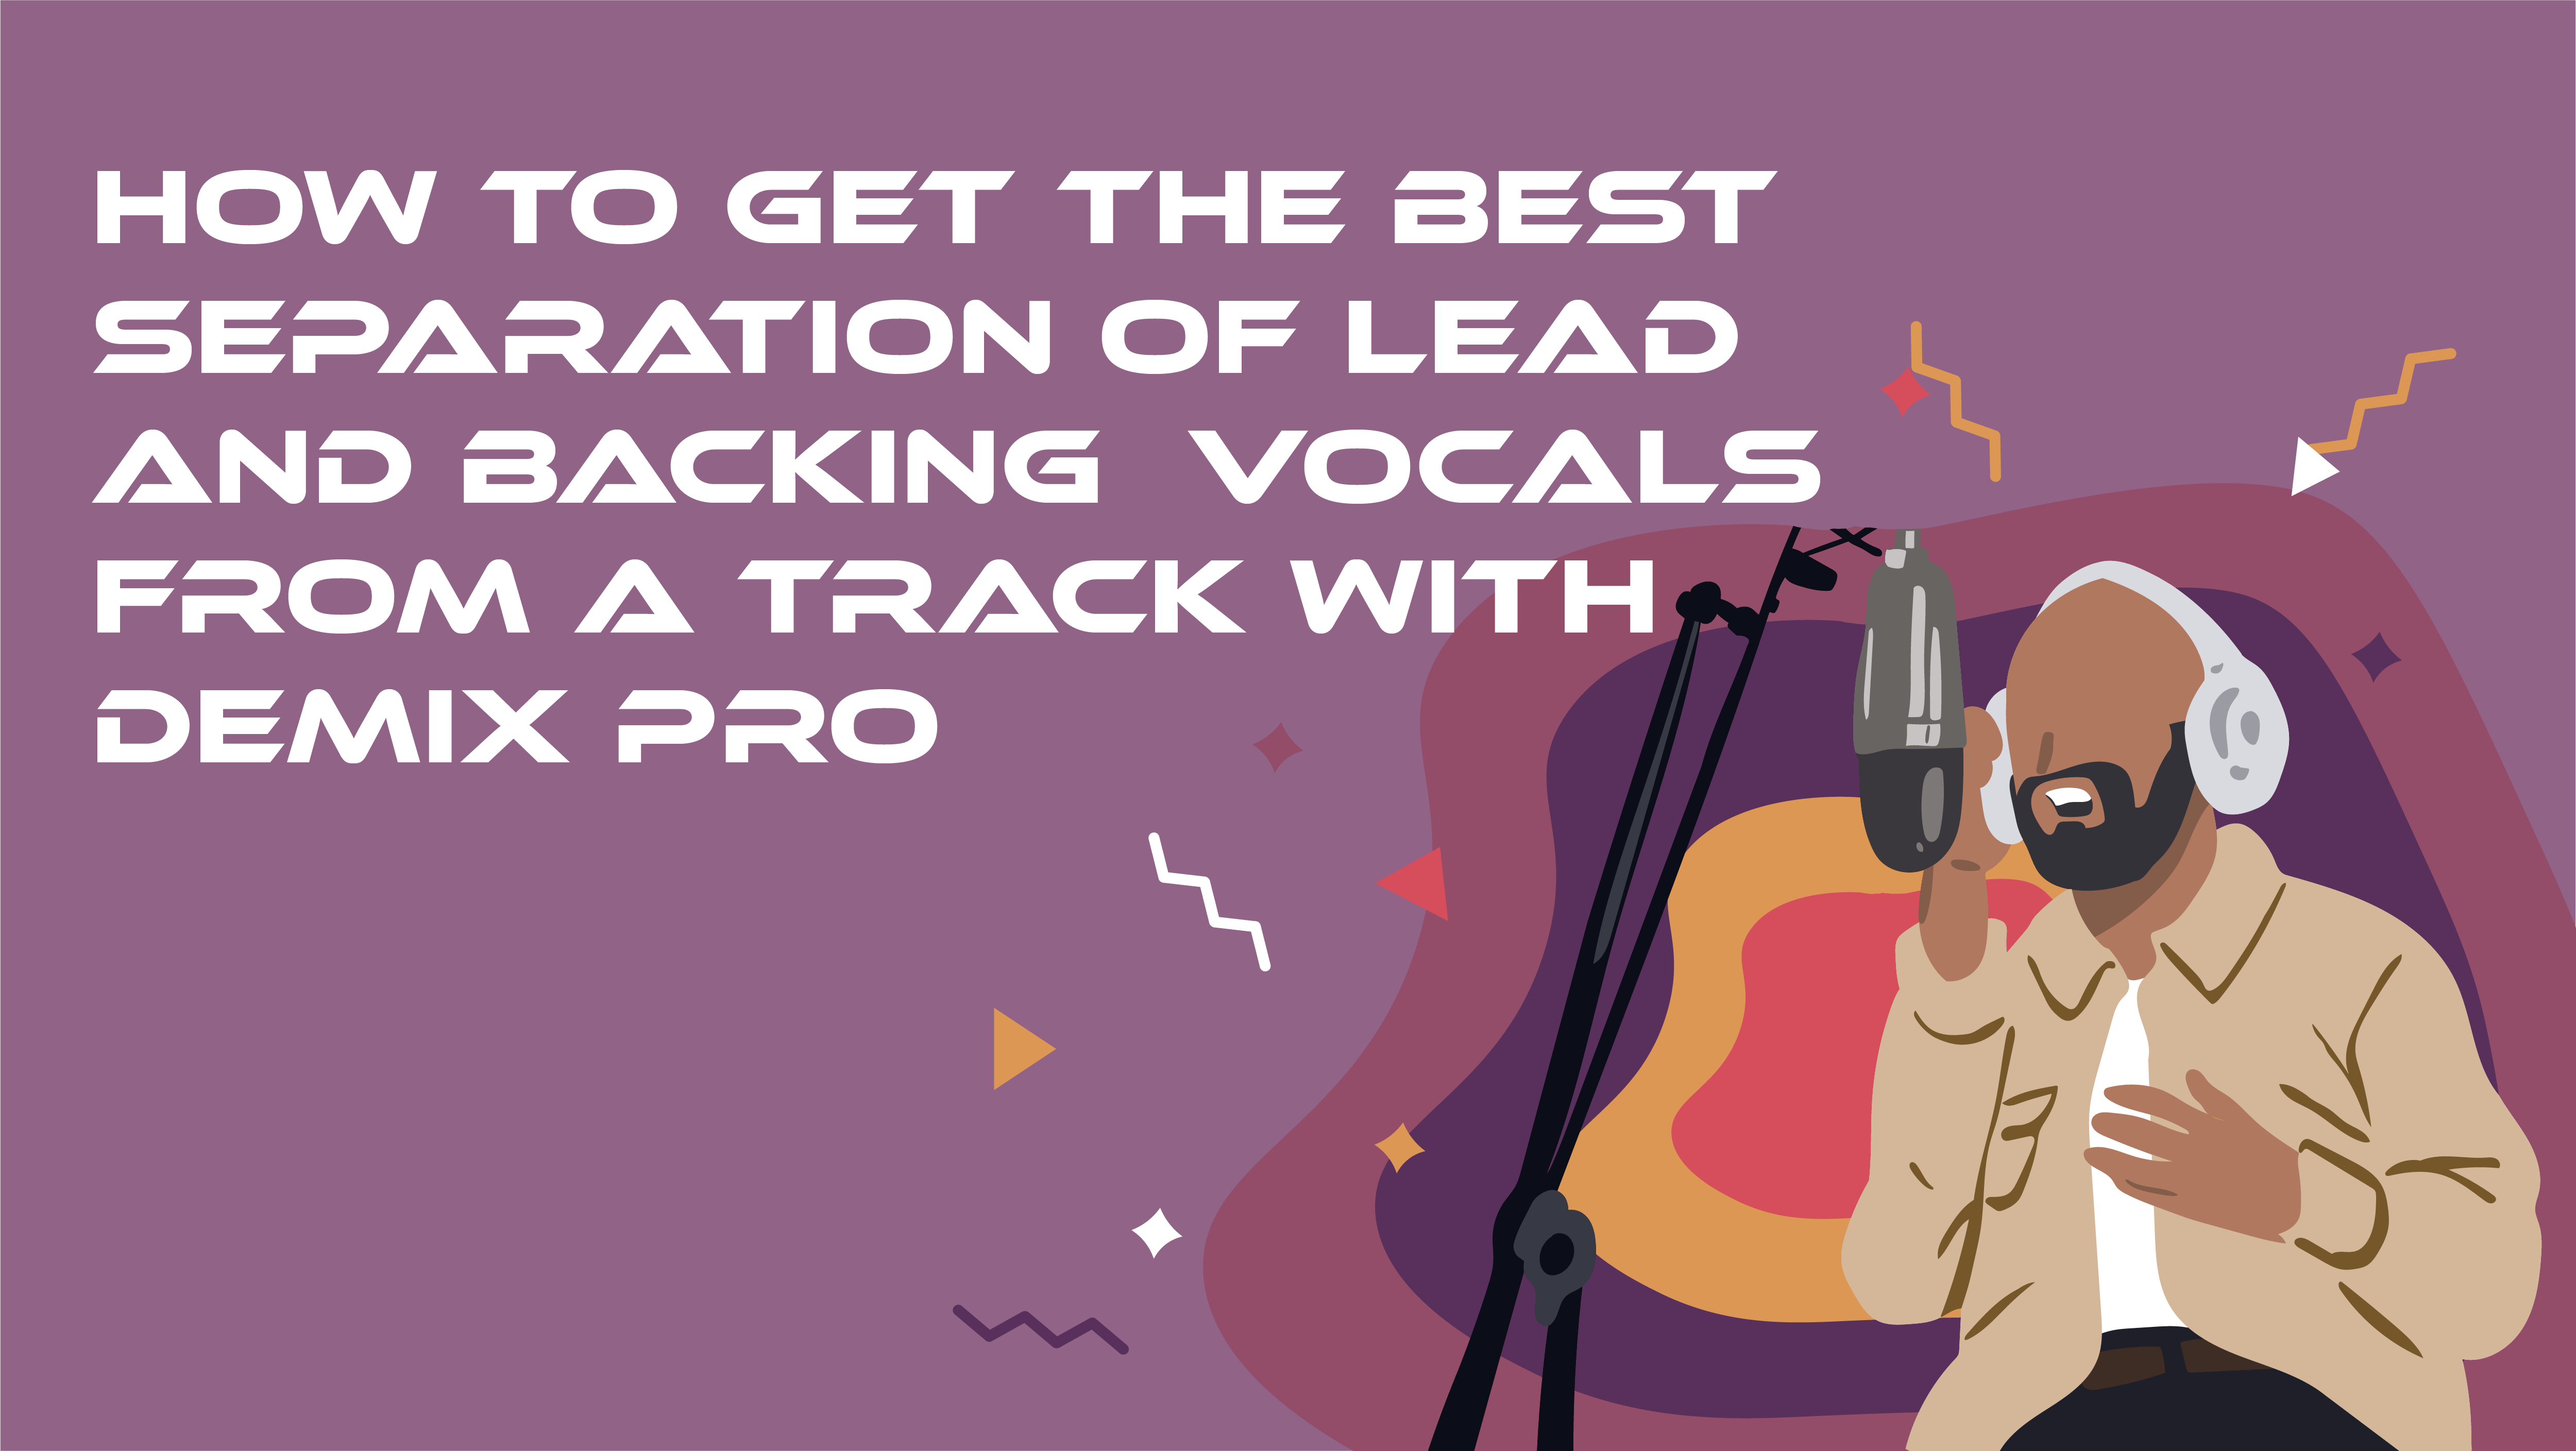 How to get the Best Separation of Lead and Backing Vocals From a track Using DeMix Pro 3.0